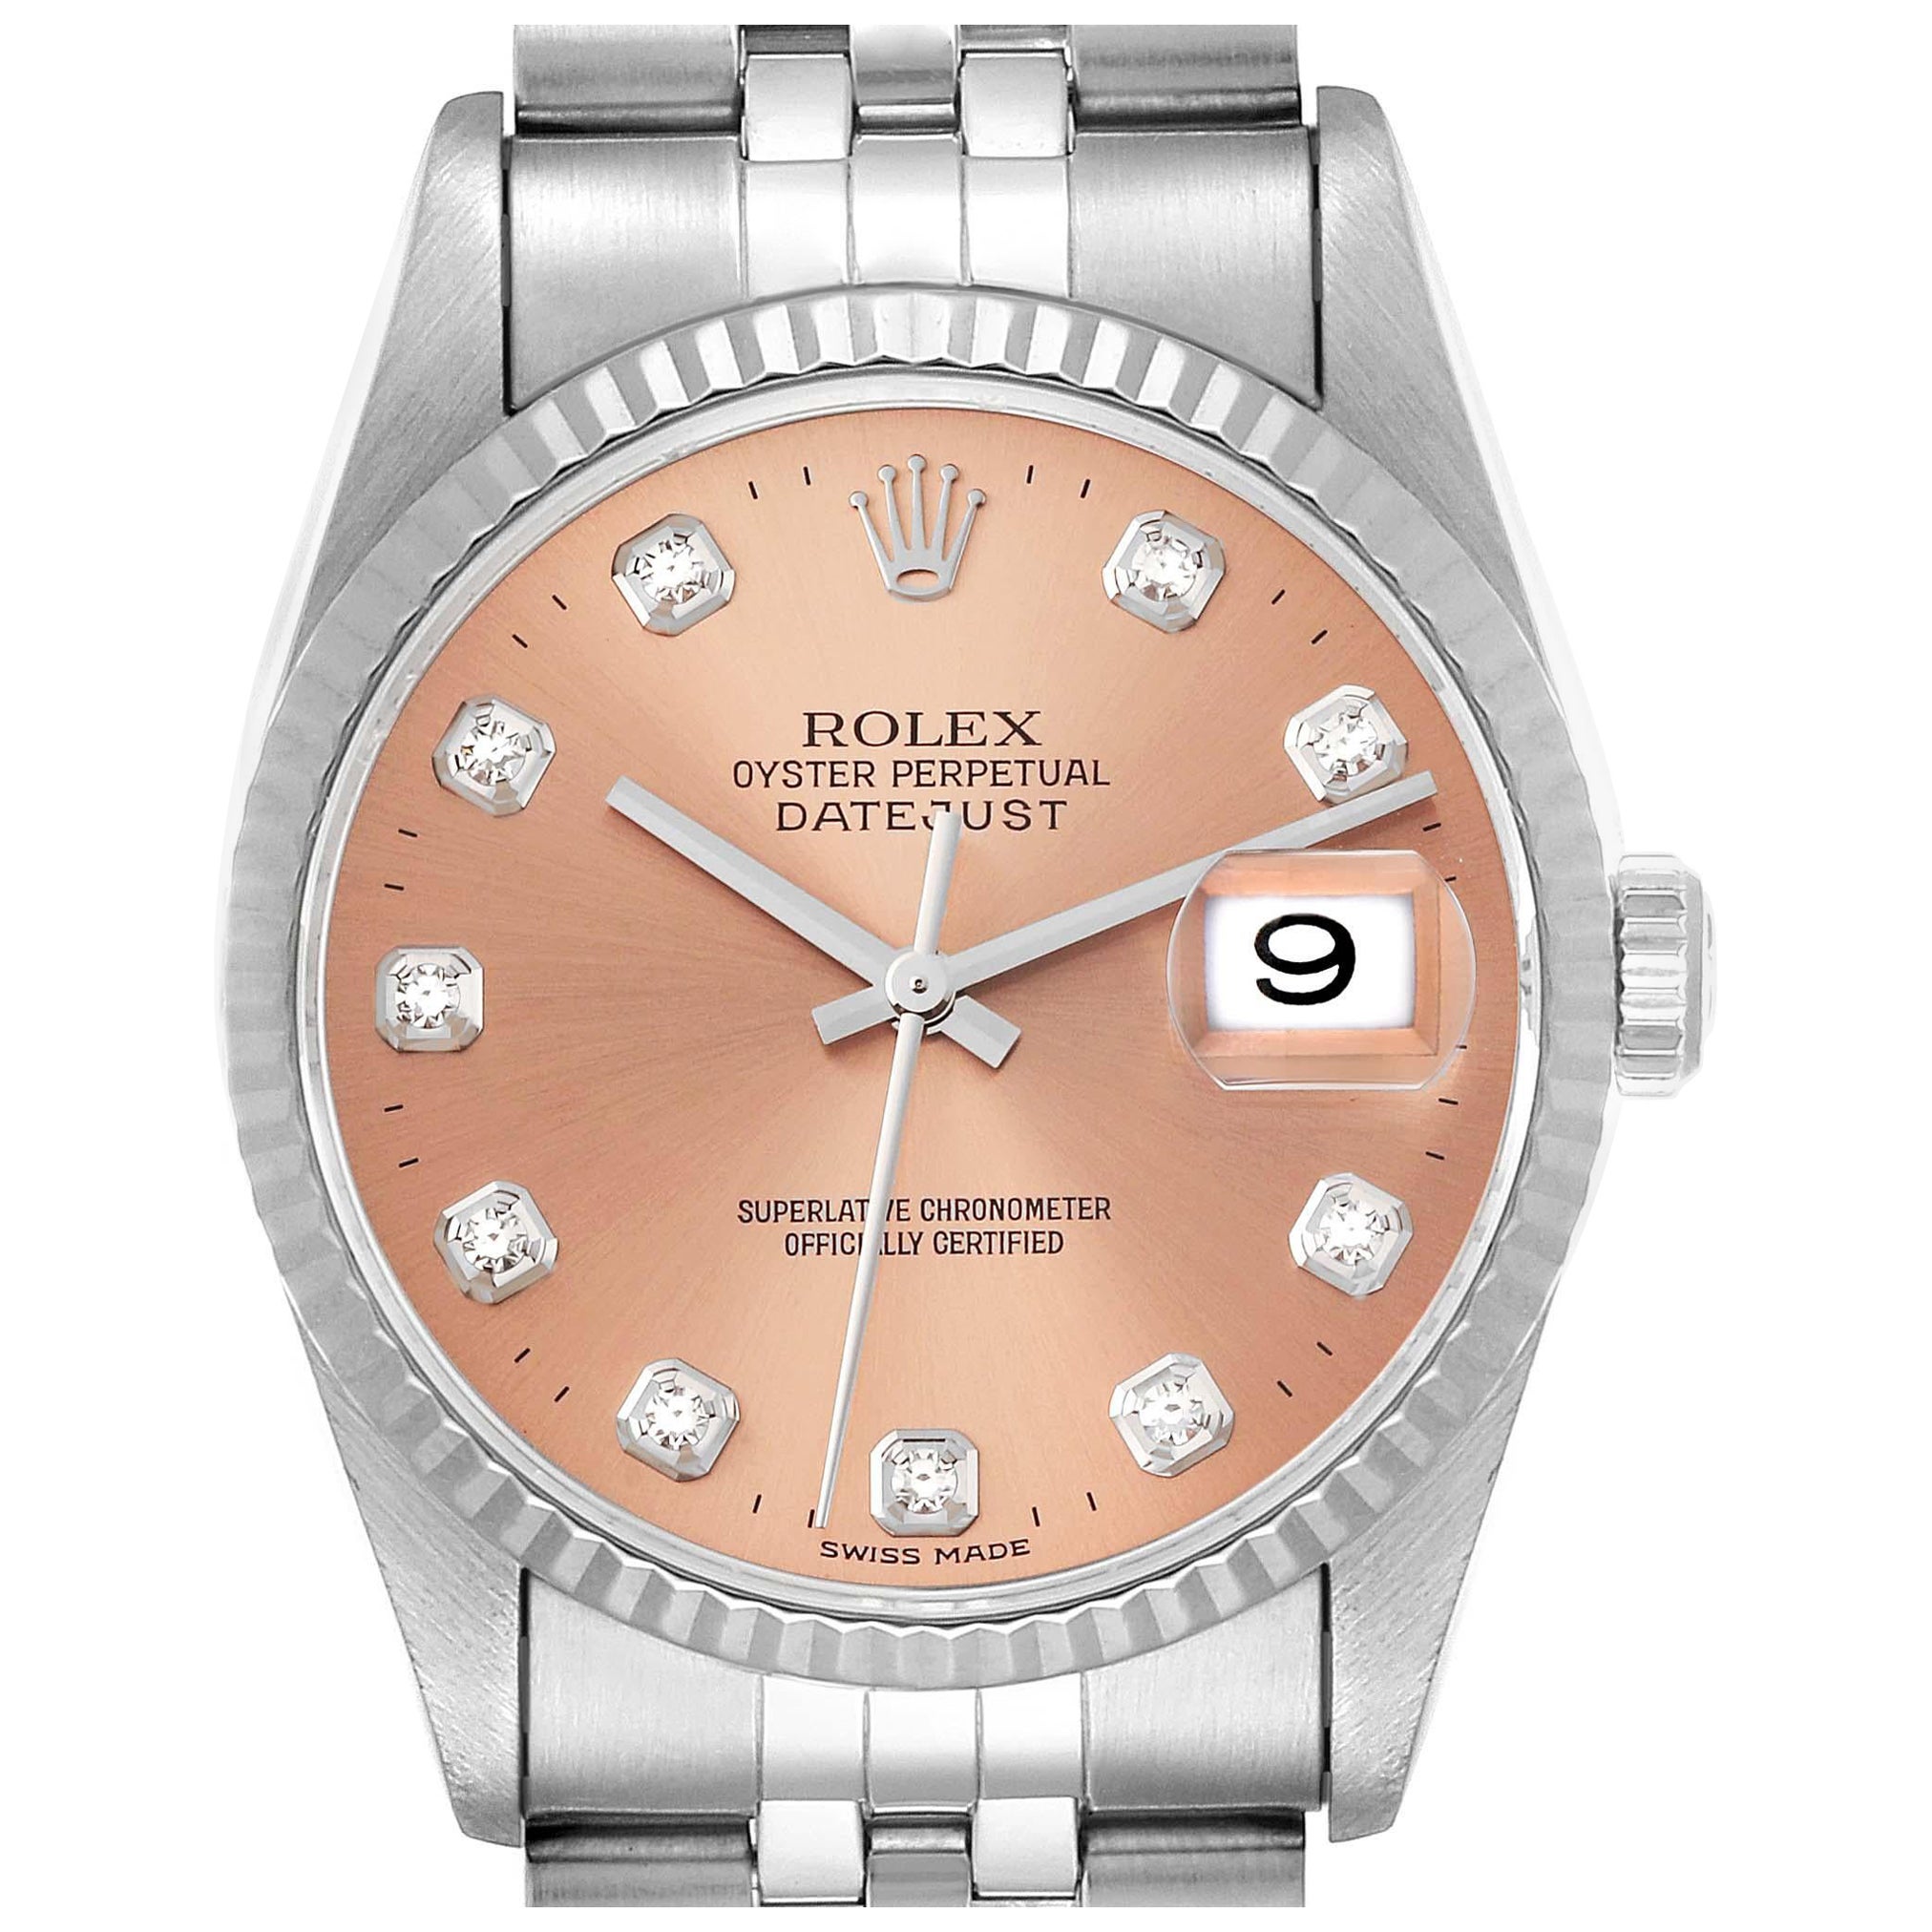 Rolex Datejust Steel White Gold Salmon Diamond Dial Mens Watch 16234 For Sale